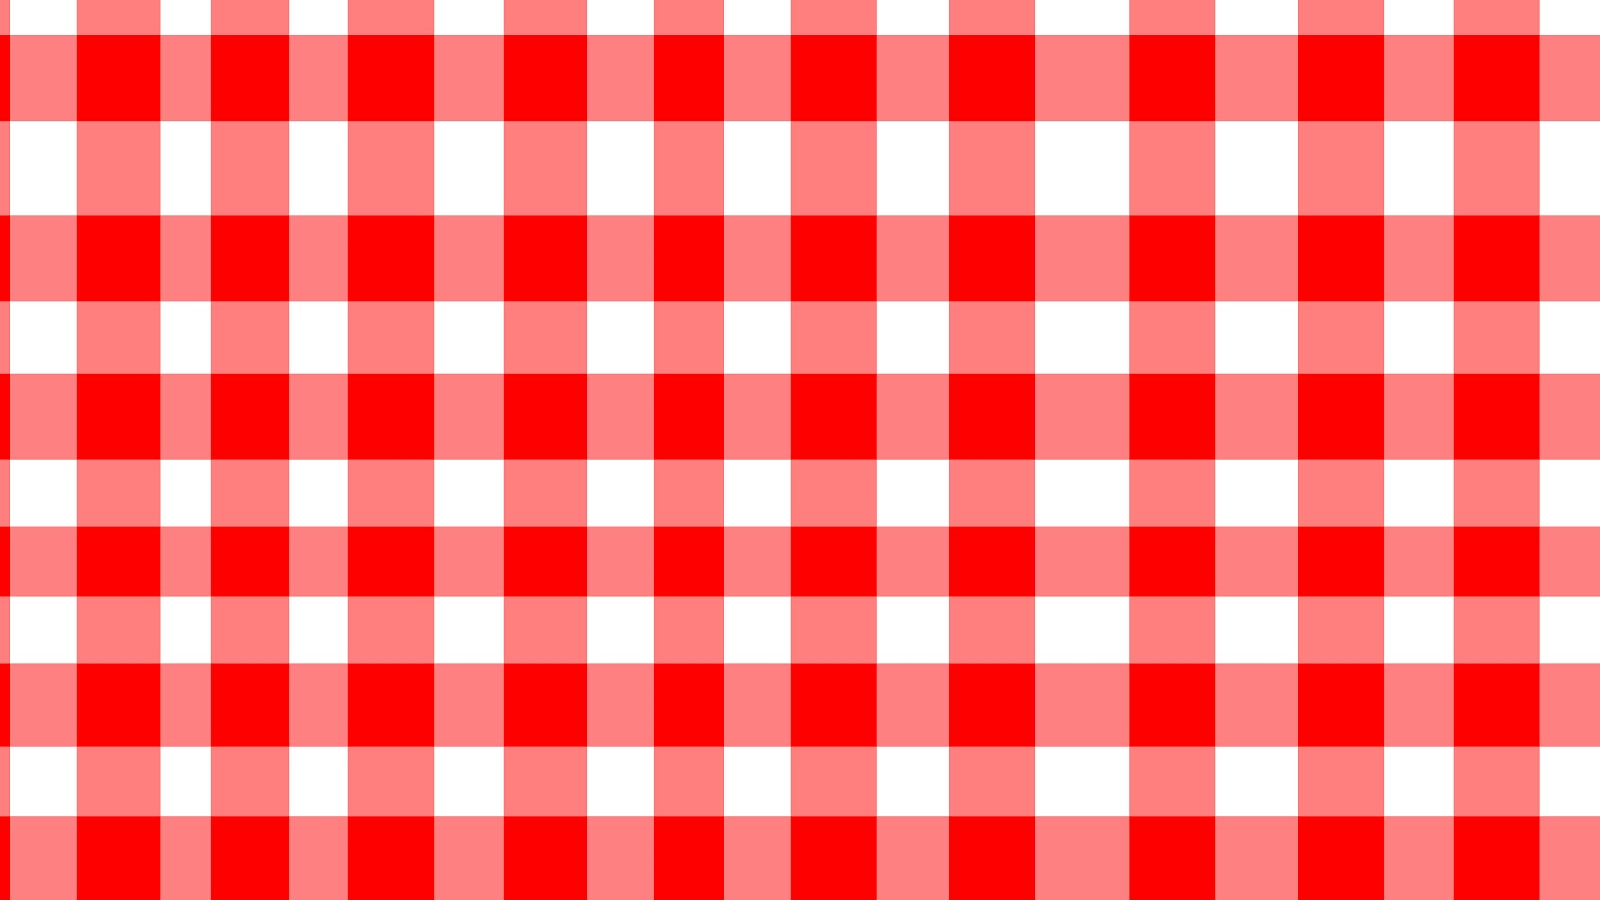 Free download Red And White Checkered Background Red and white